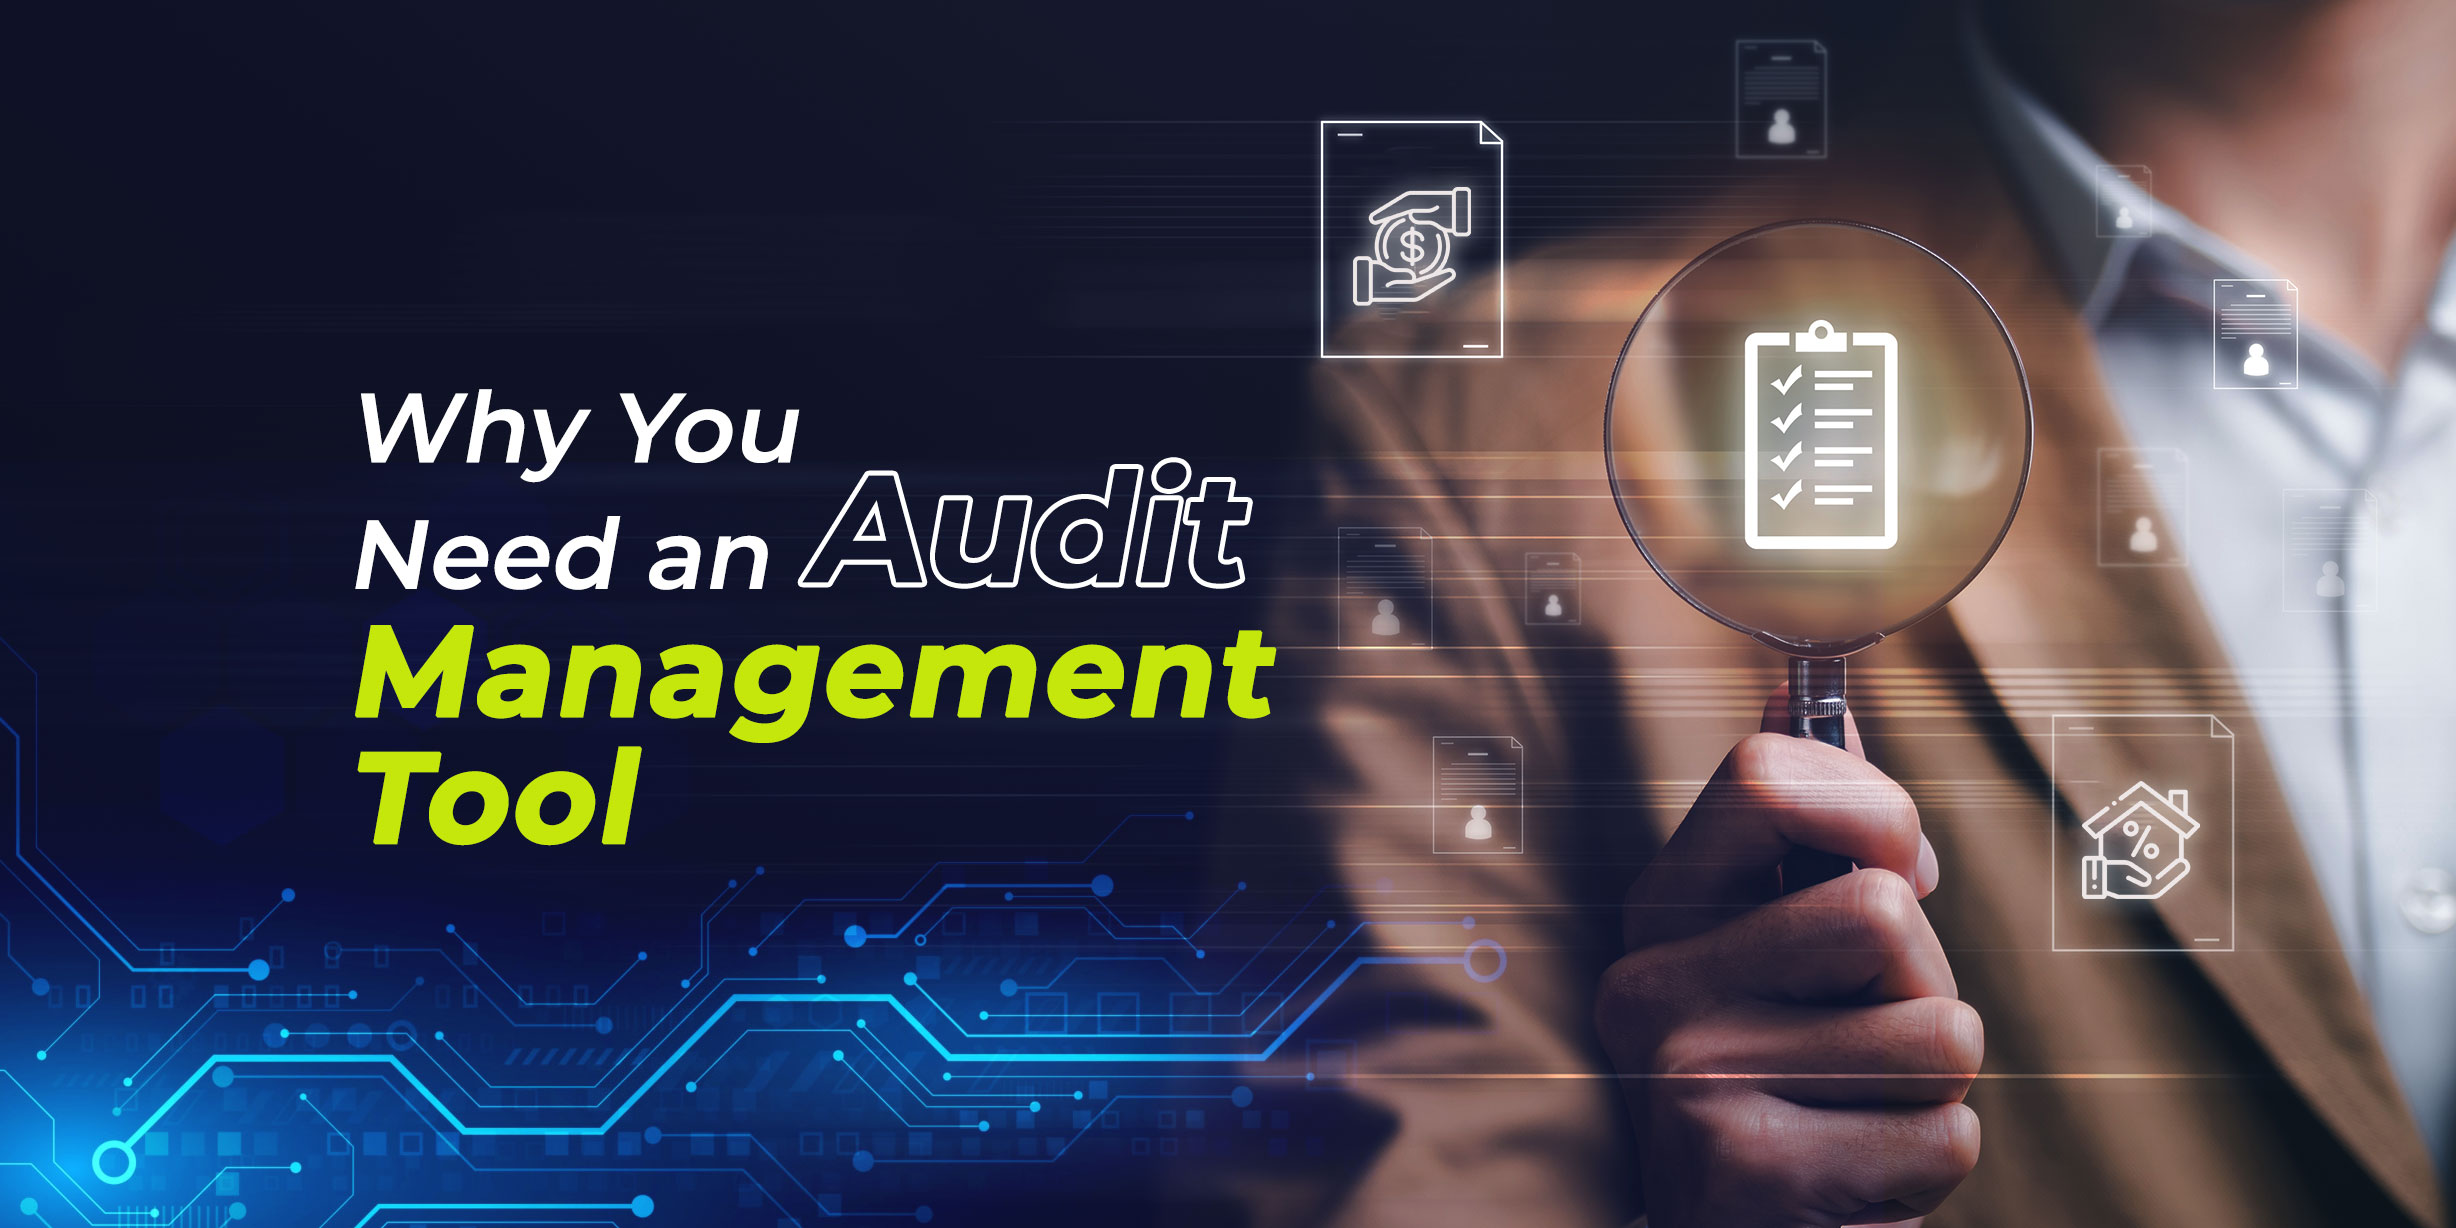 Why You Need an Audit Management Tool